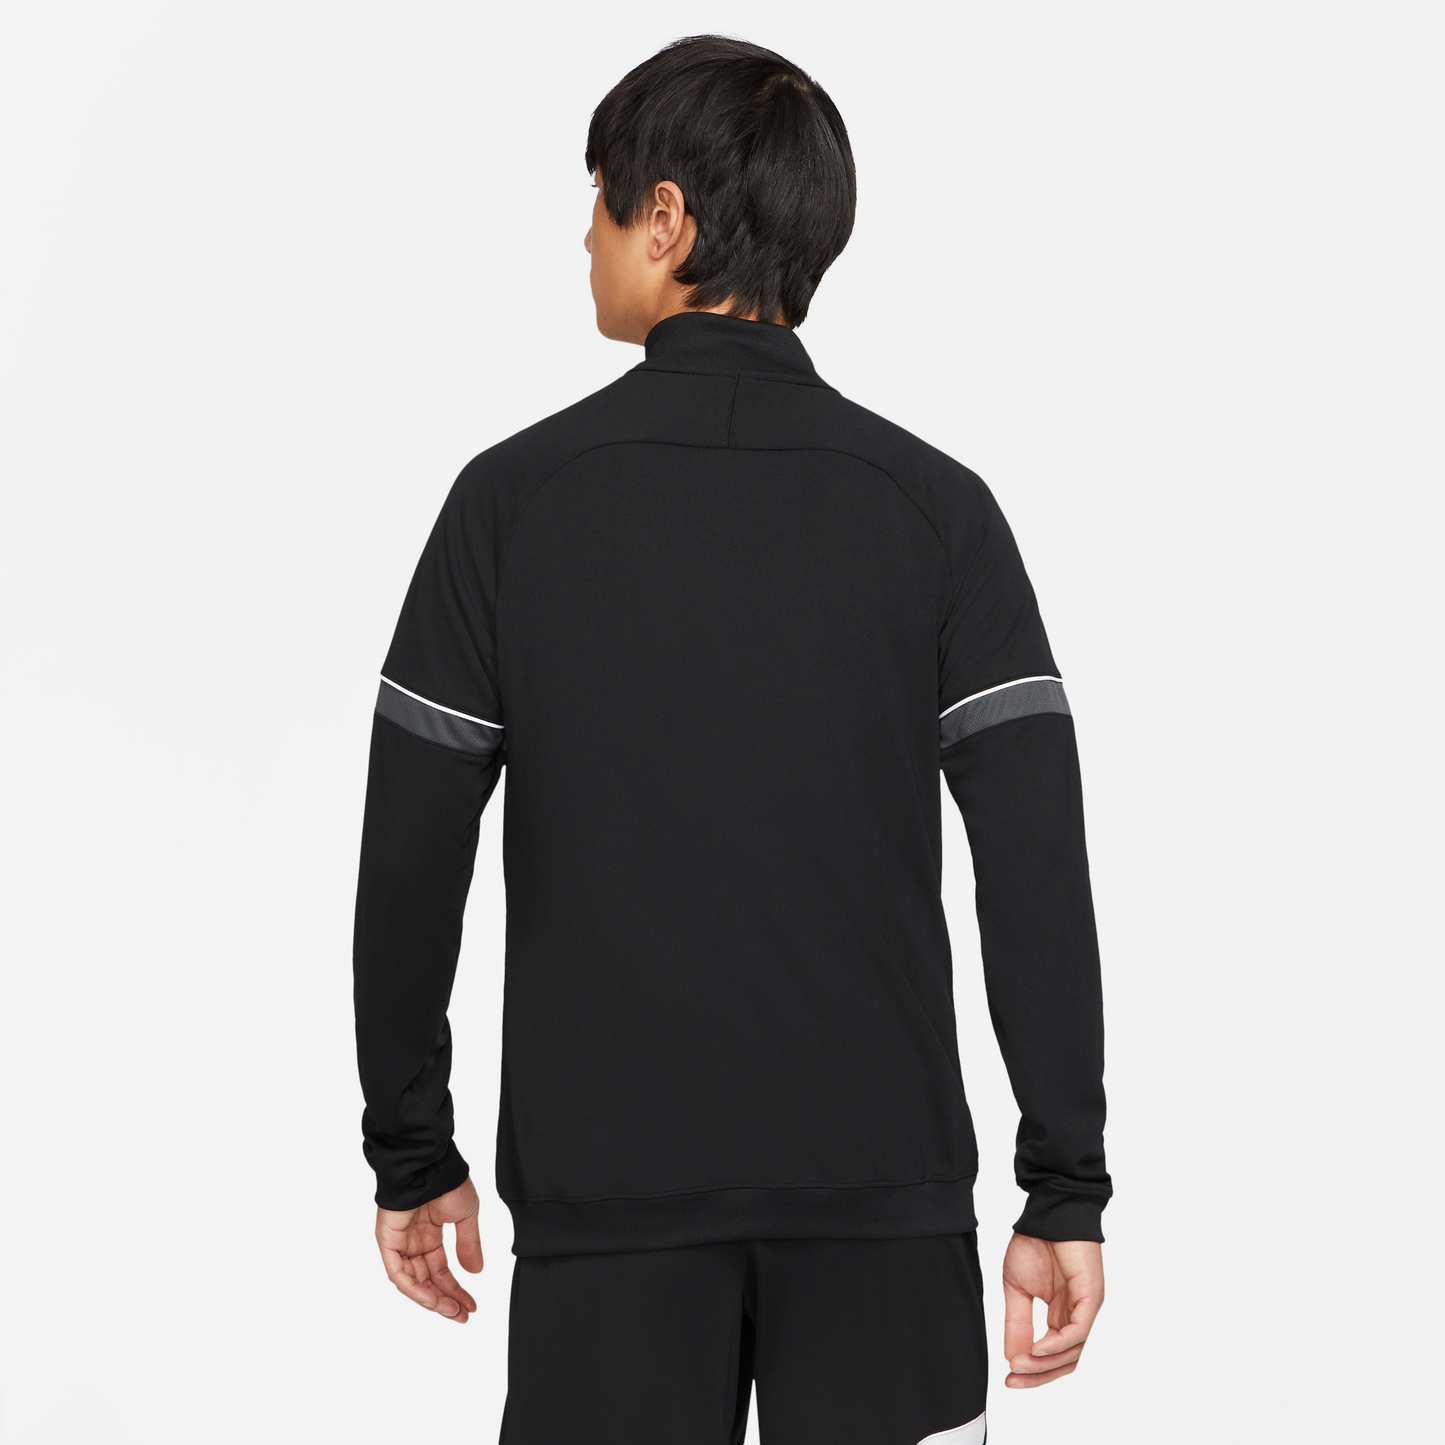 DURIE HILL FC NIKE TRACK JACKET - YOUTH'S